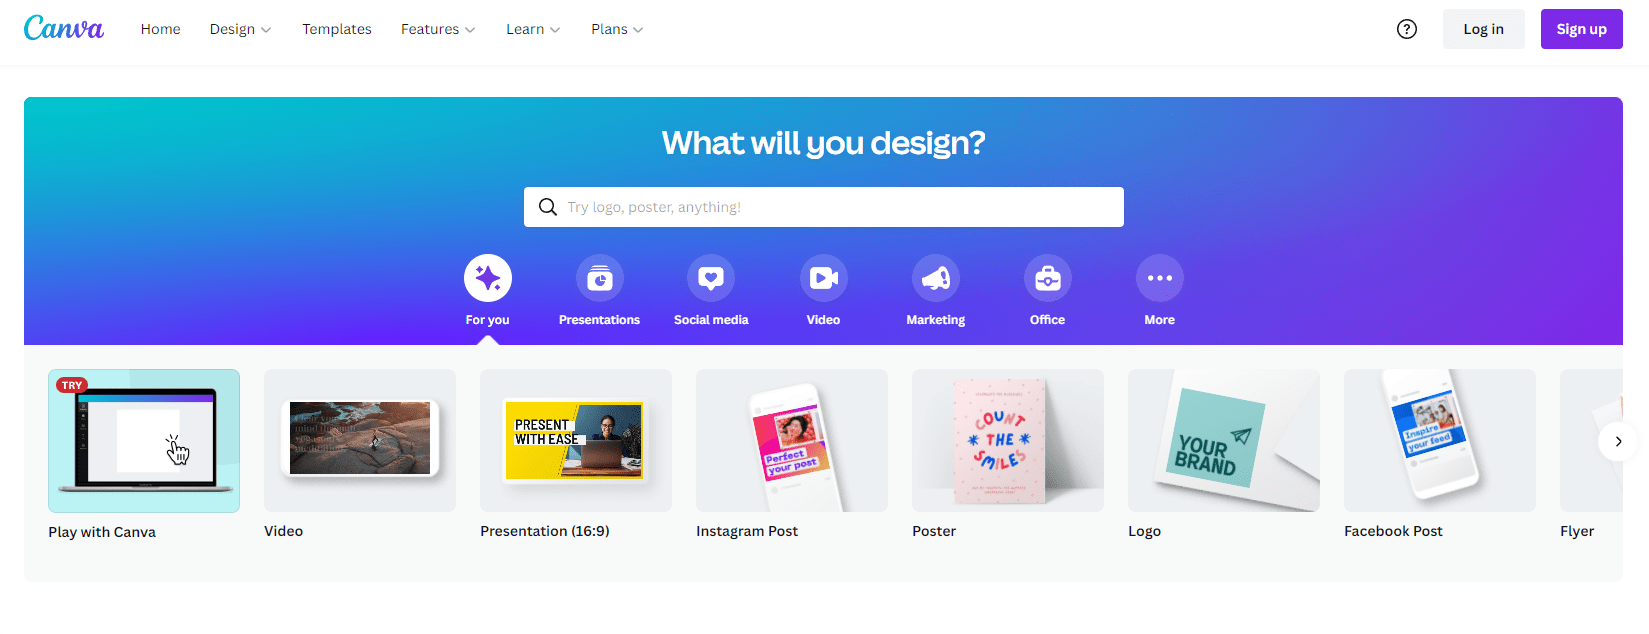 Canva home Page